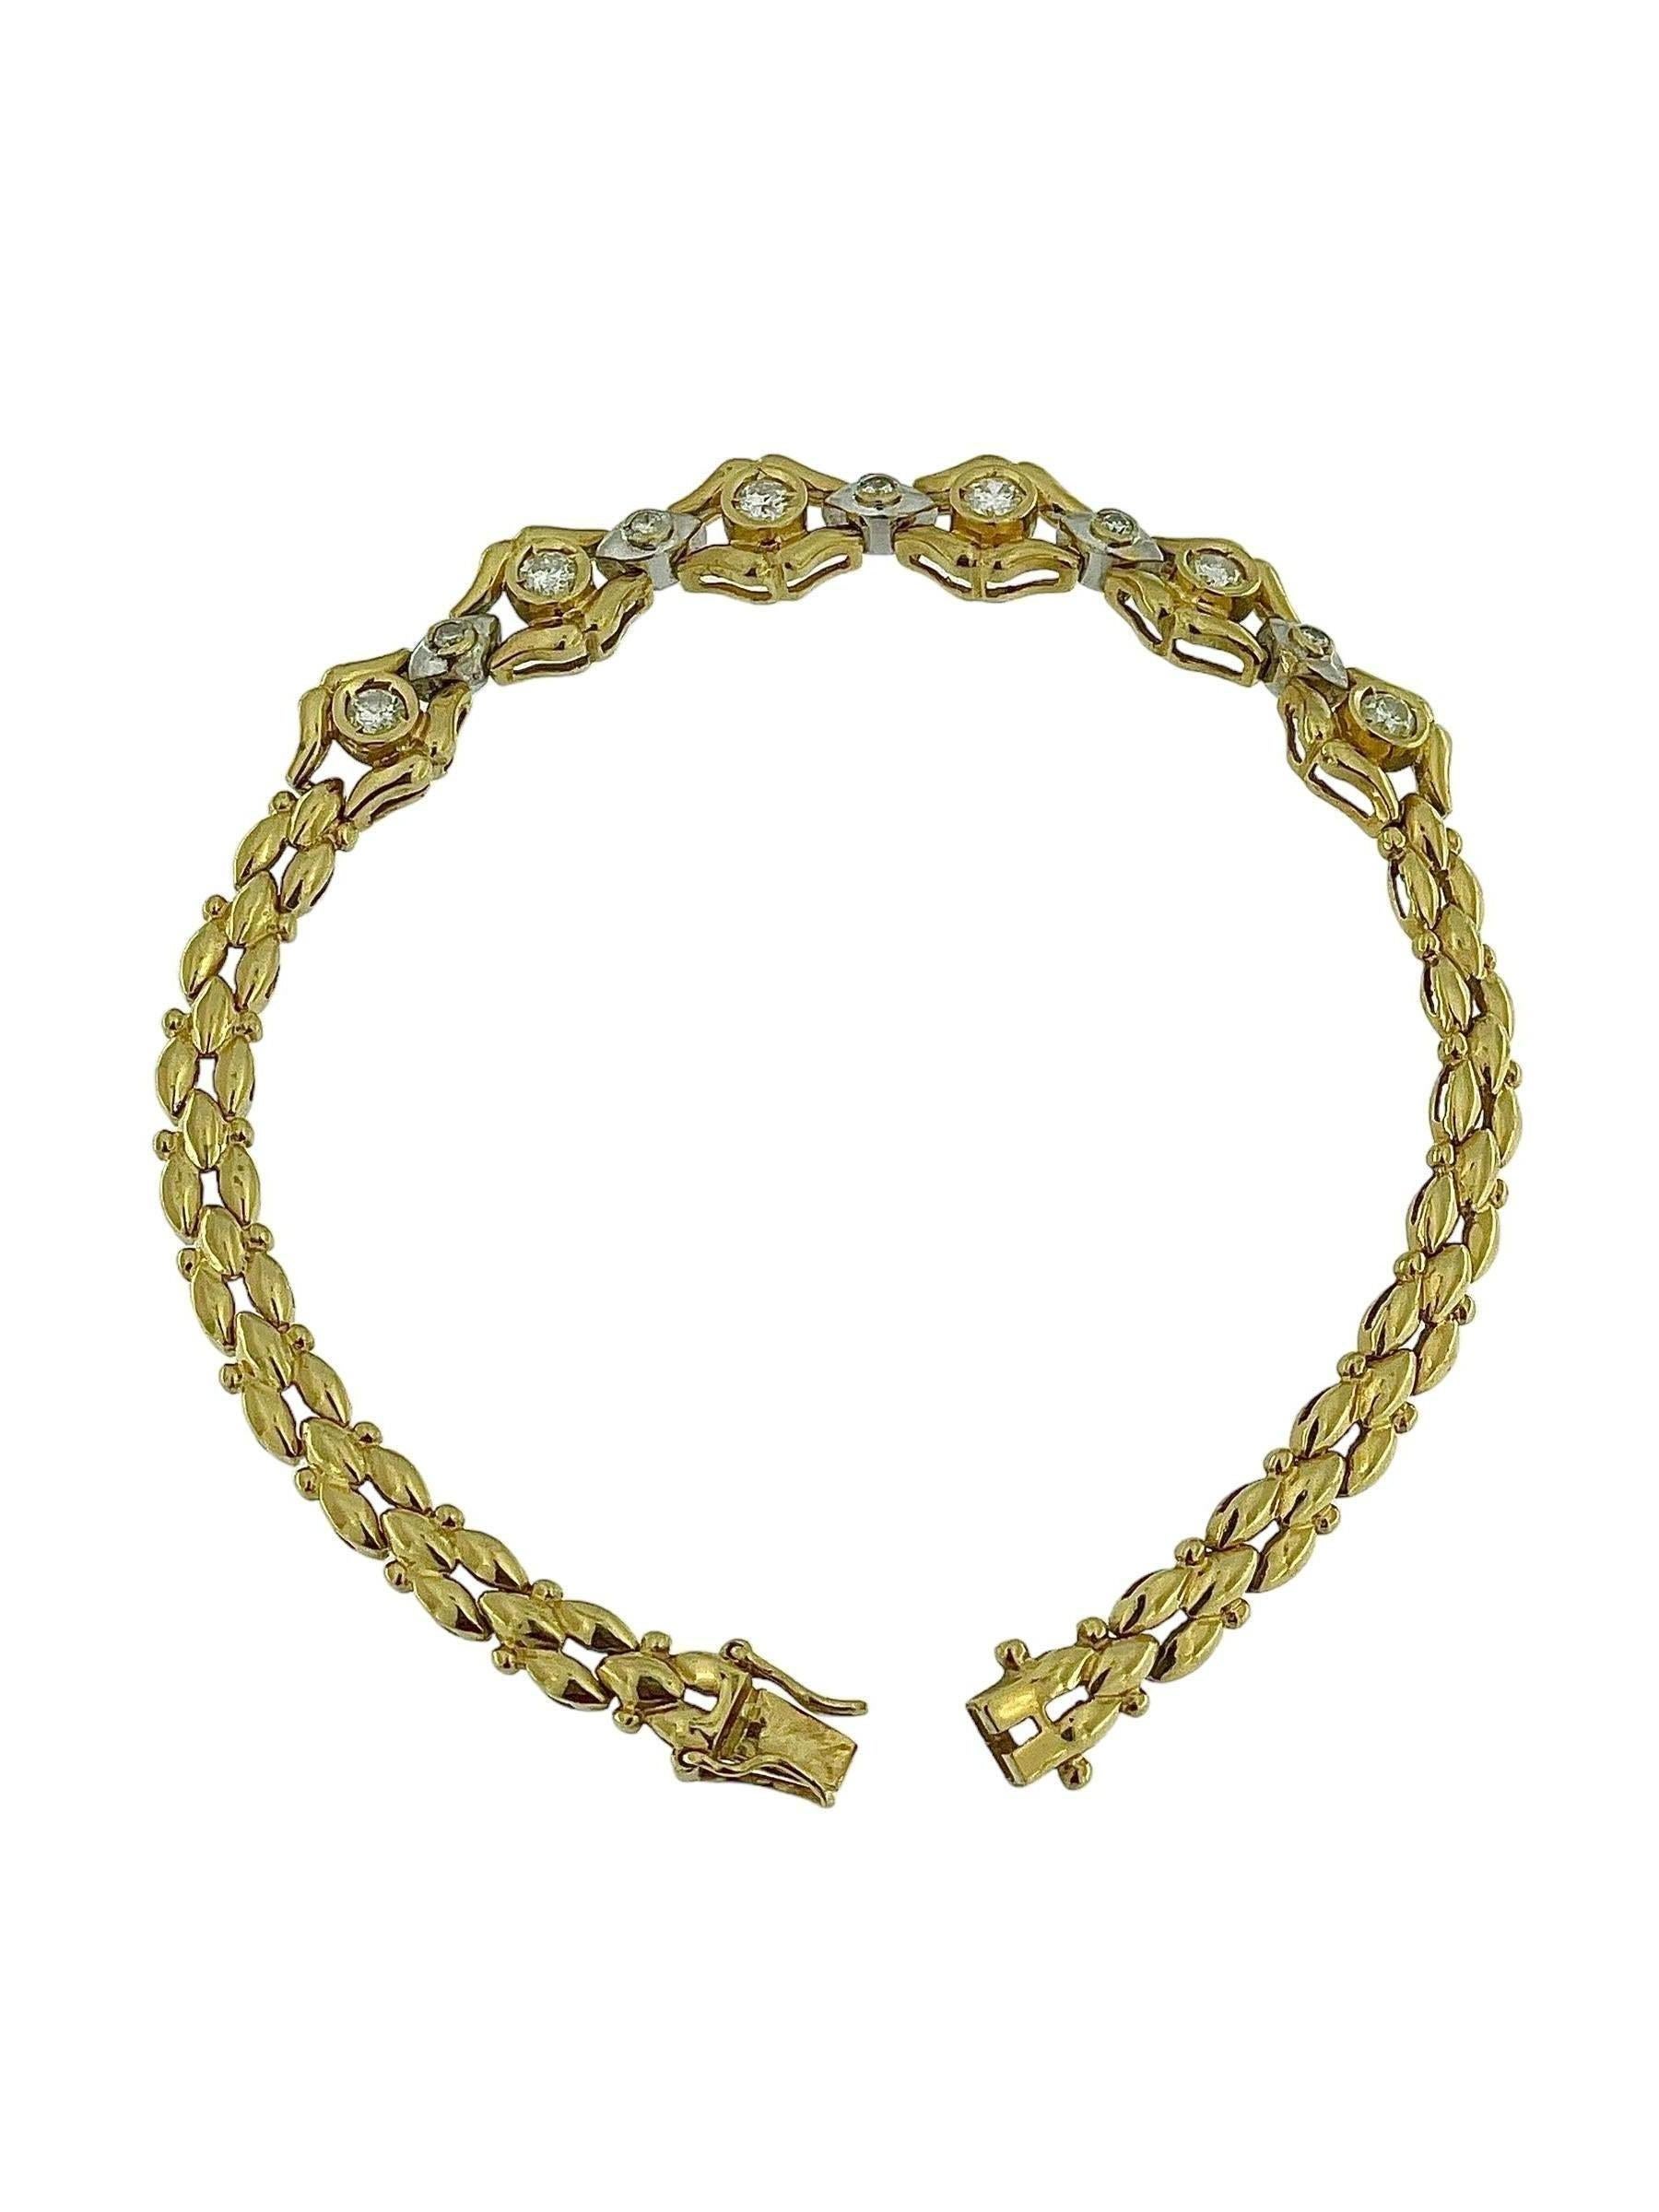 Retro Gold Bracelet with Diamonds HRD Certified For Sale 2